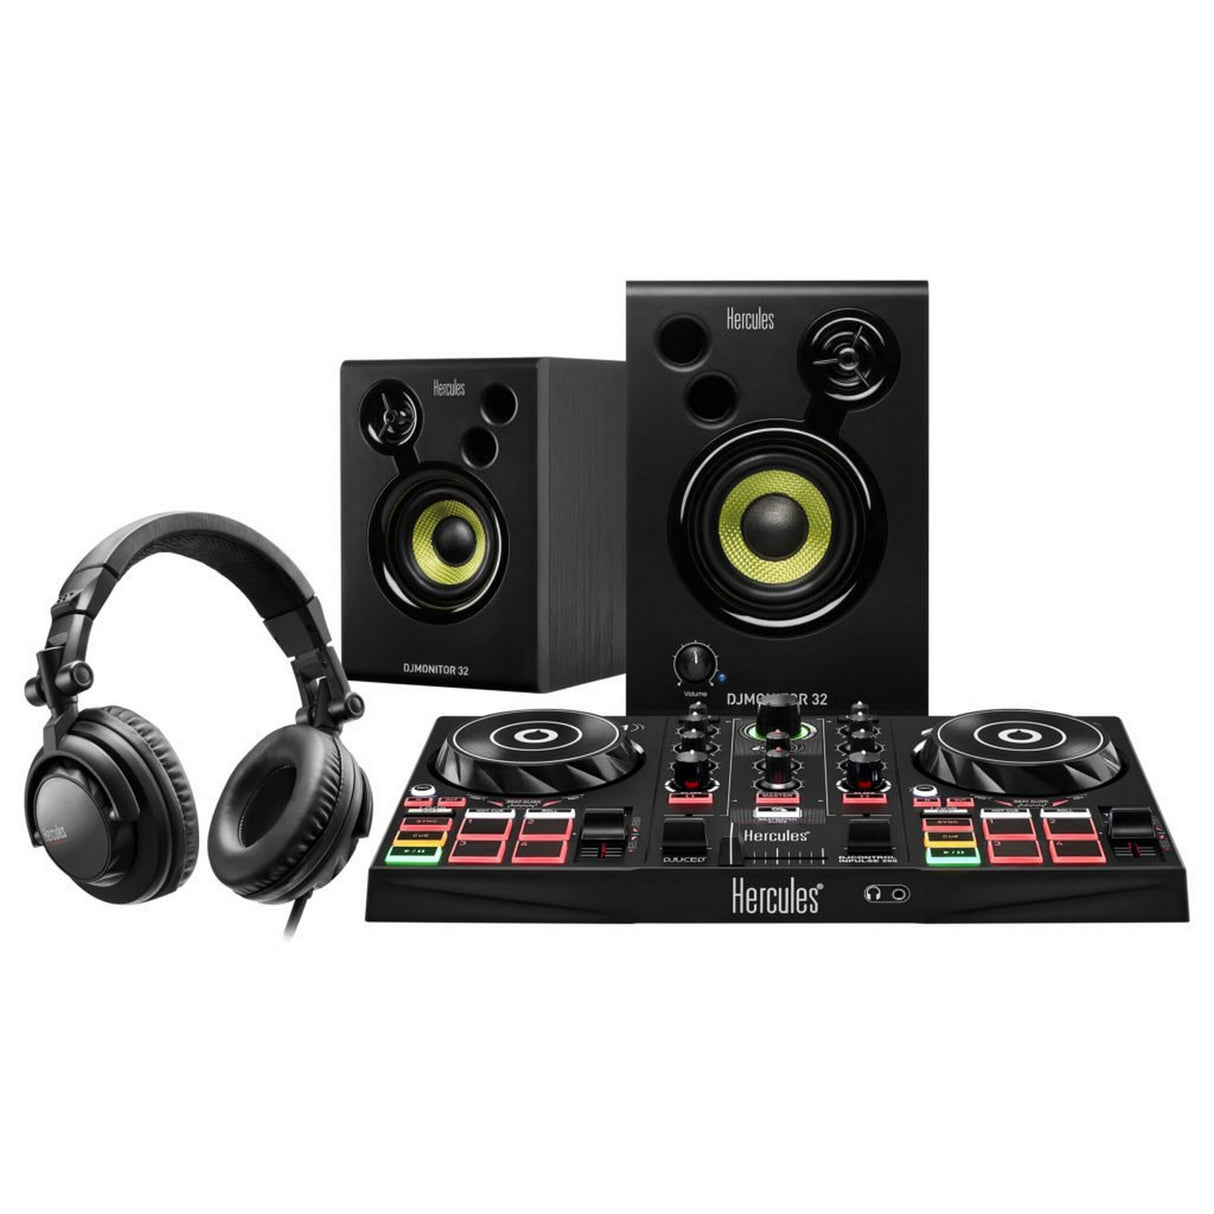 Hercules DJLearning Kit All-In-One DJ Kit with Controller, Headphone, Speakers and Software